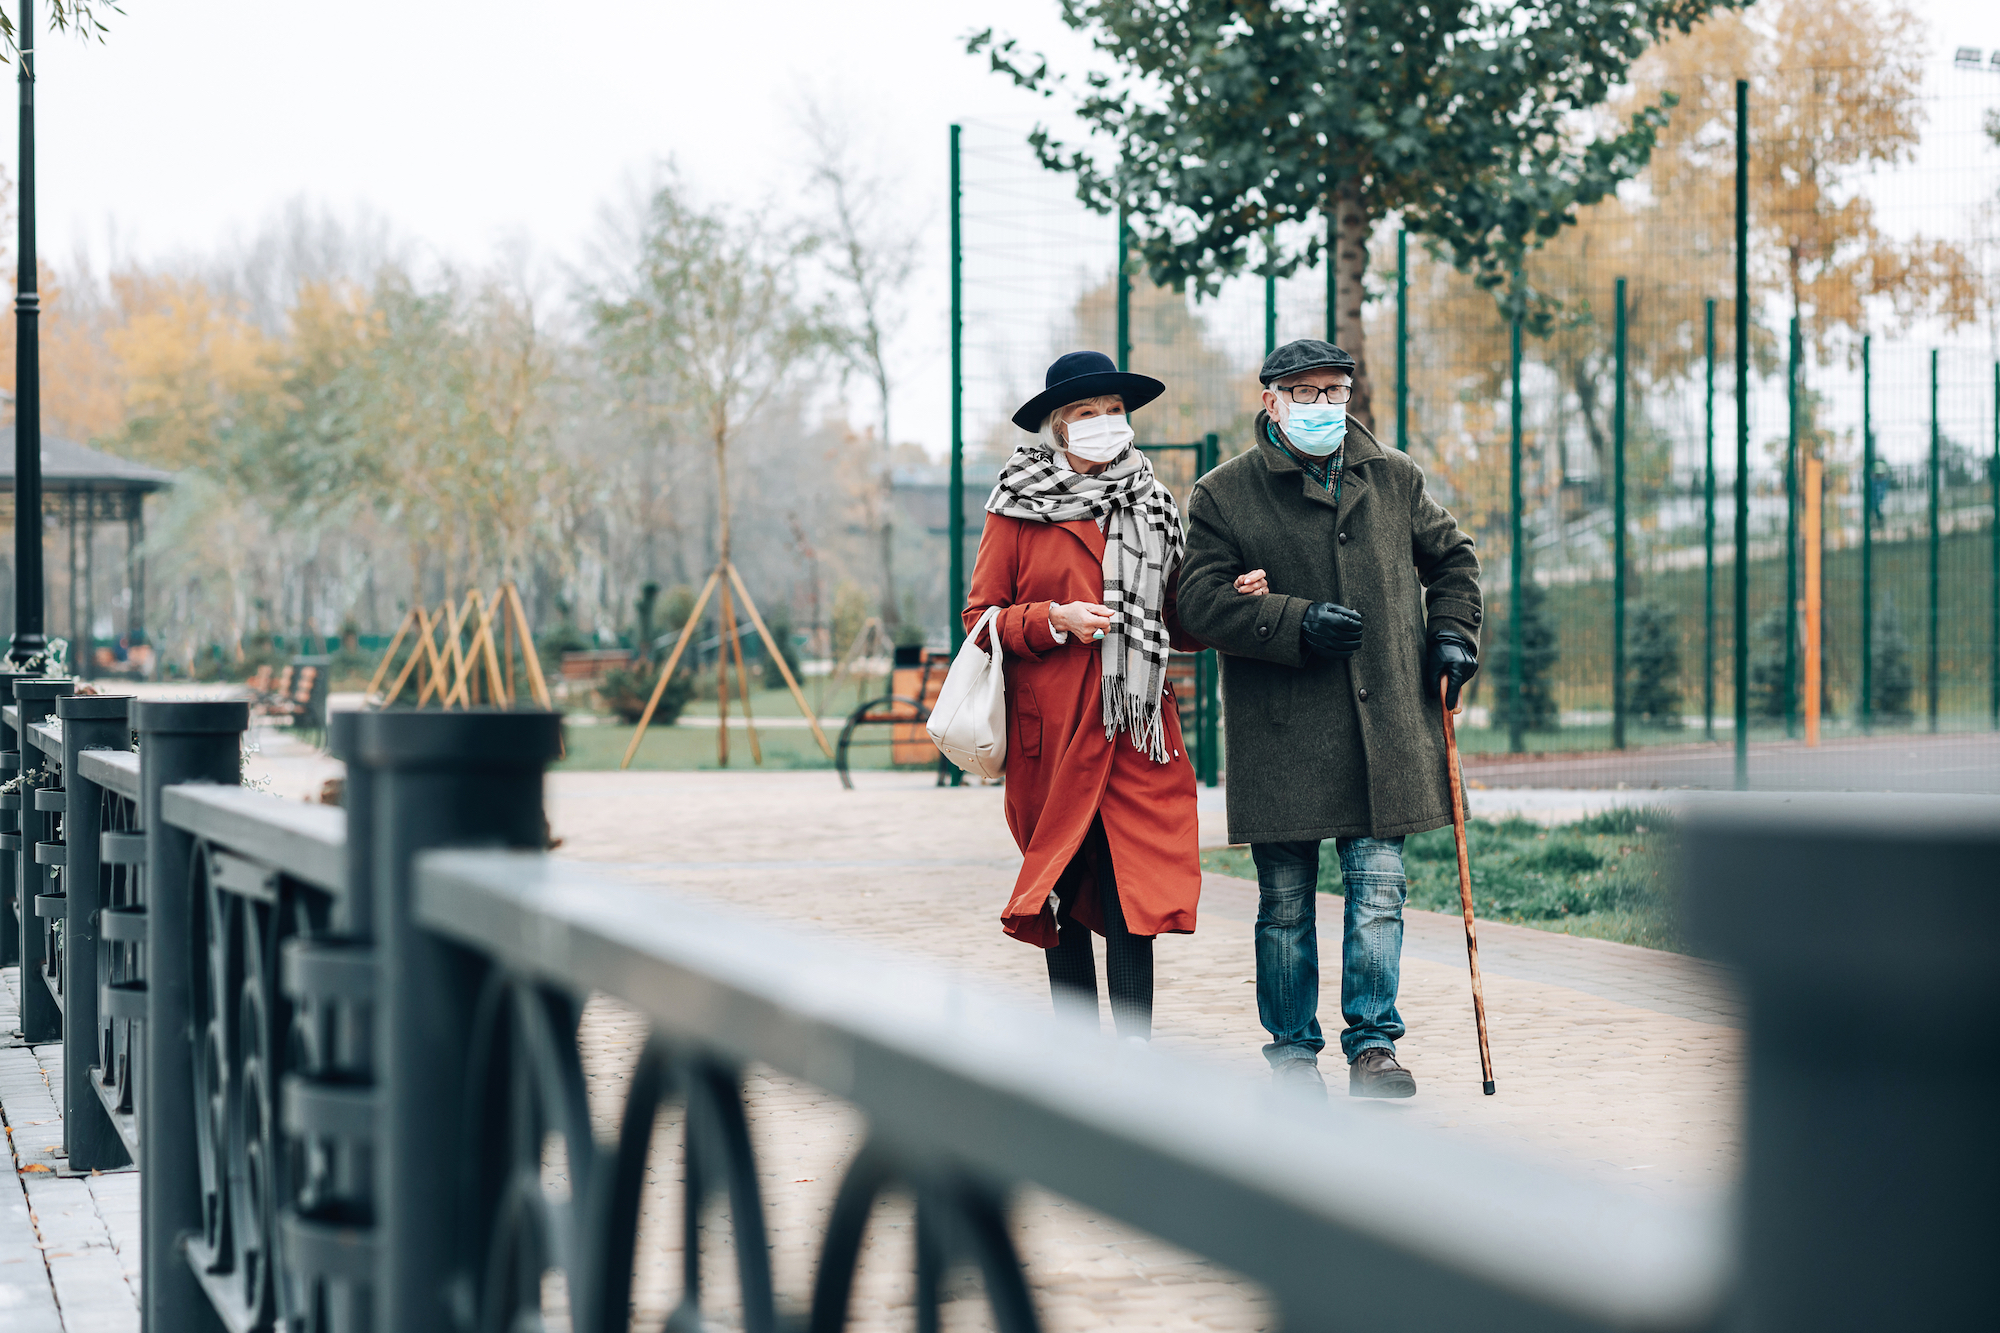 Two older adults walking outside, wearing cold-weather gear, walking arm in arm across a bridge, trees in the background.